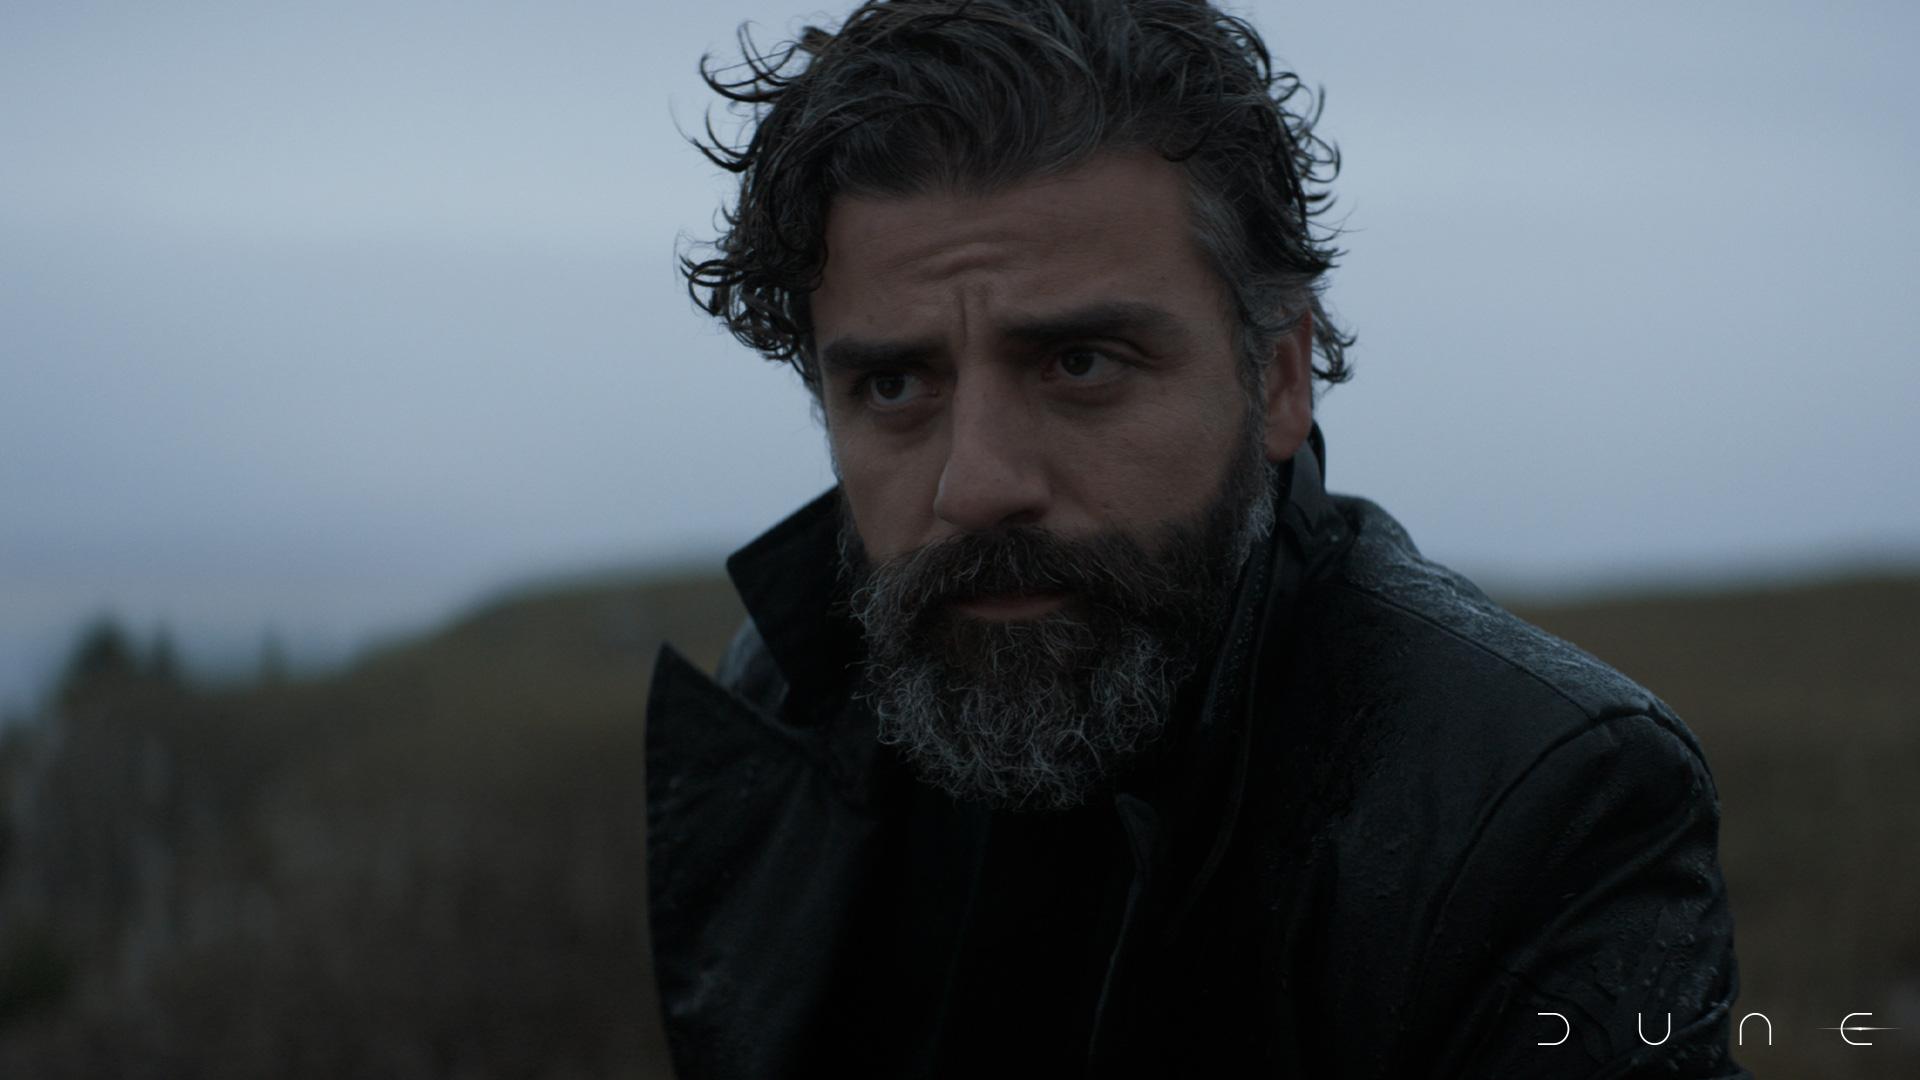 Oscar Isaac as Leto Atreides in Dune. He stands on a cold open landscape.